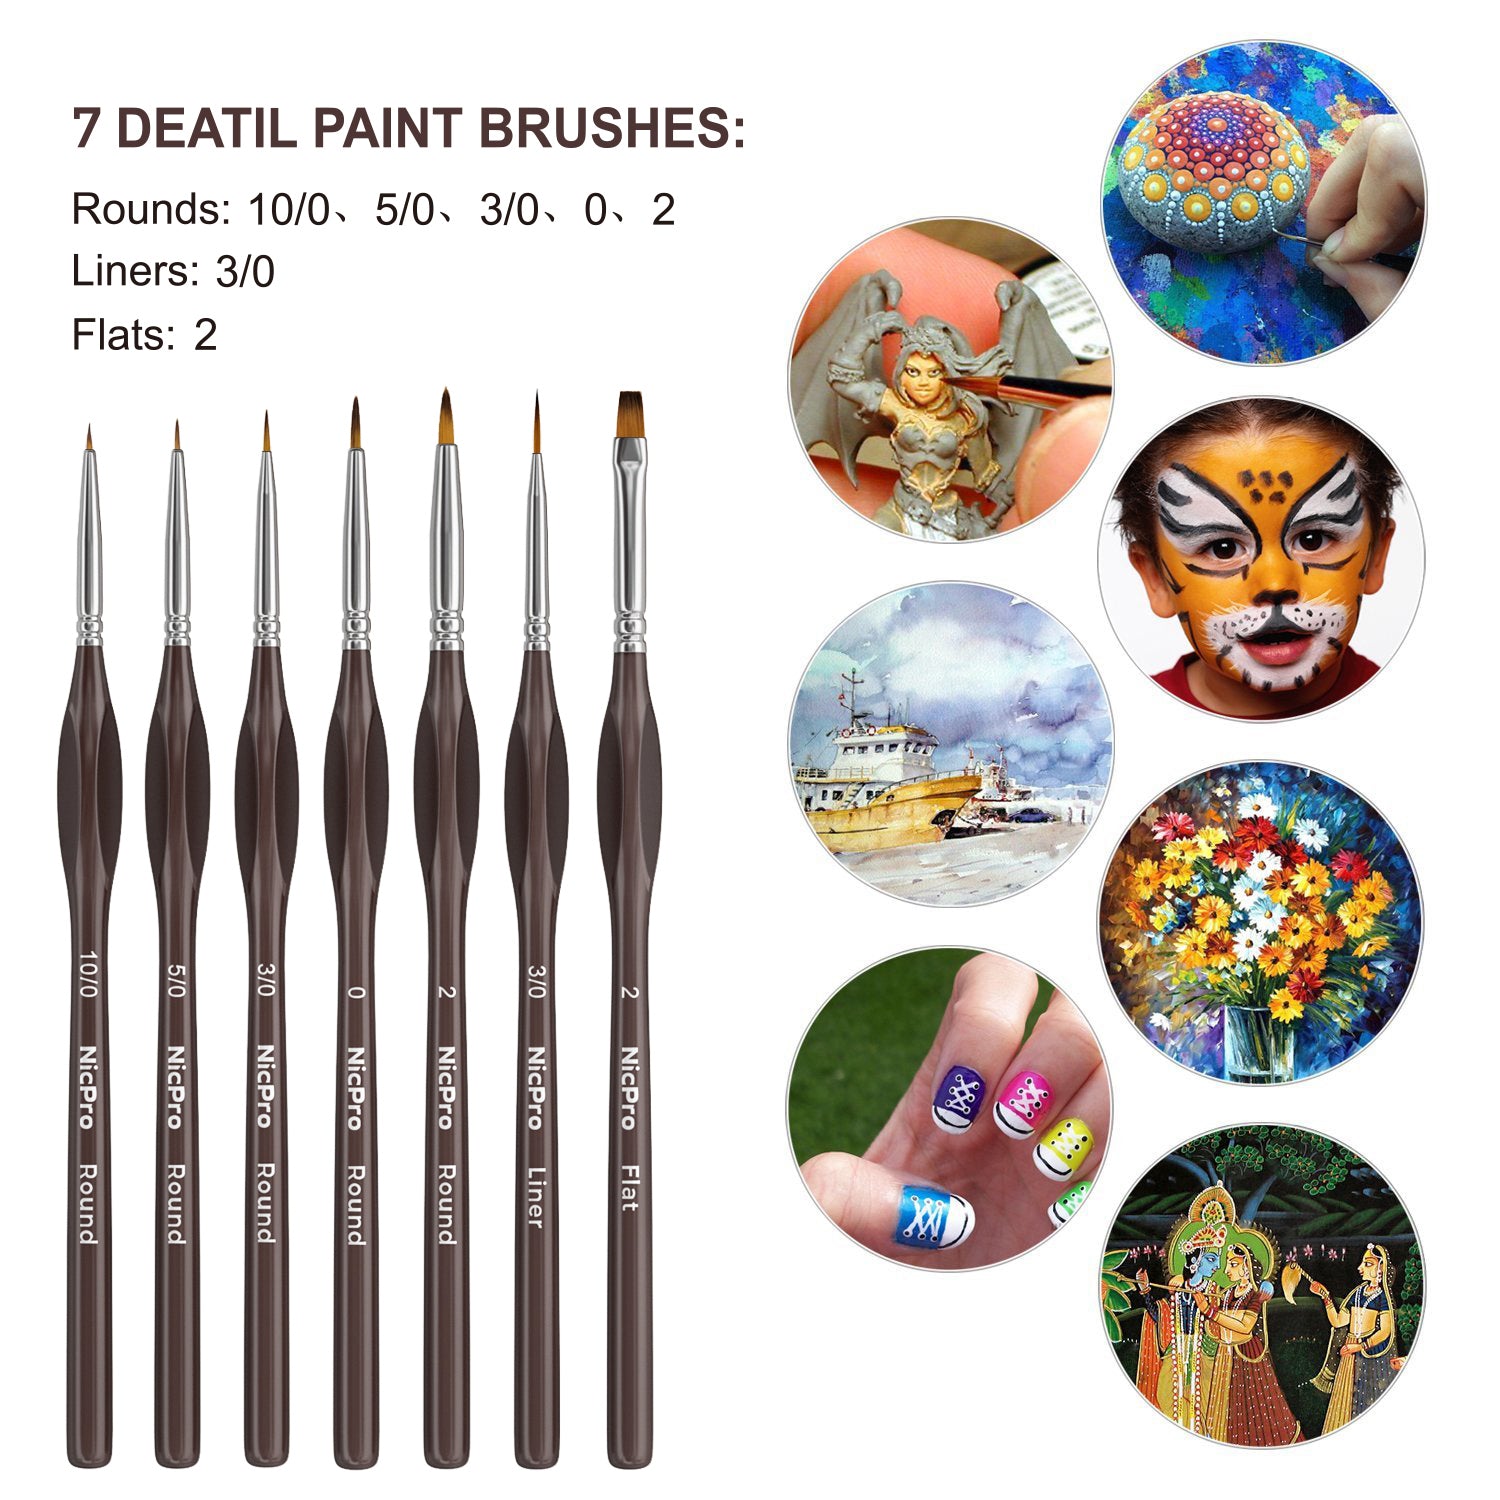 Creative Mark Disposable Detail Brushes - Disposable Hobby Brushes for  One-Time Use Painting, Commissions, Teachers, Classrooms, & More! - Set of  10